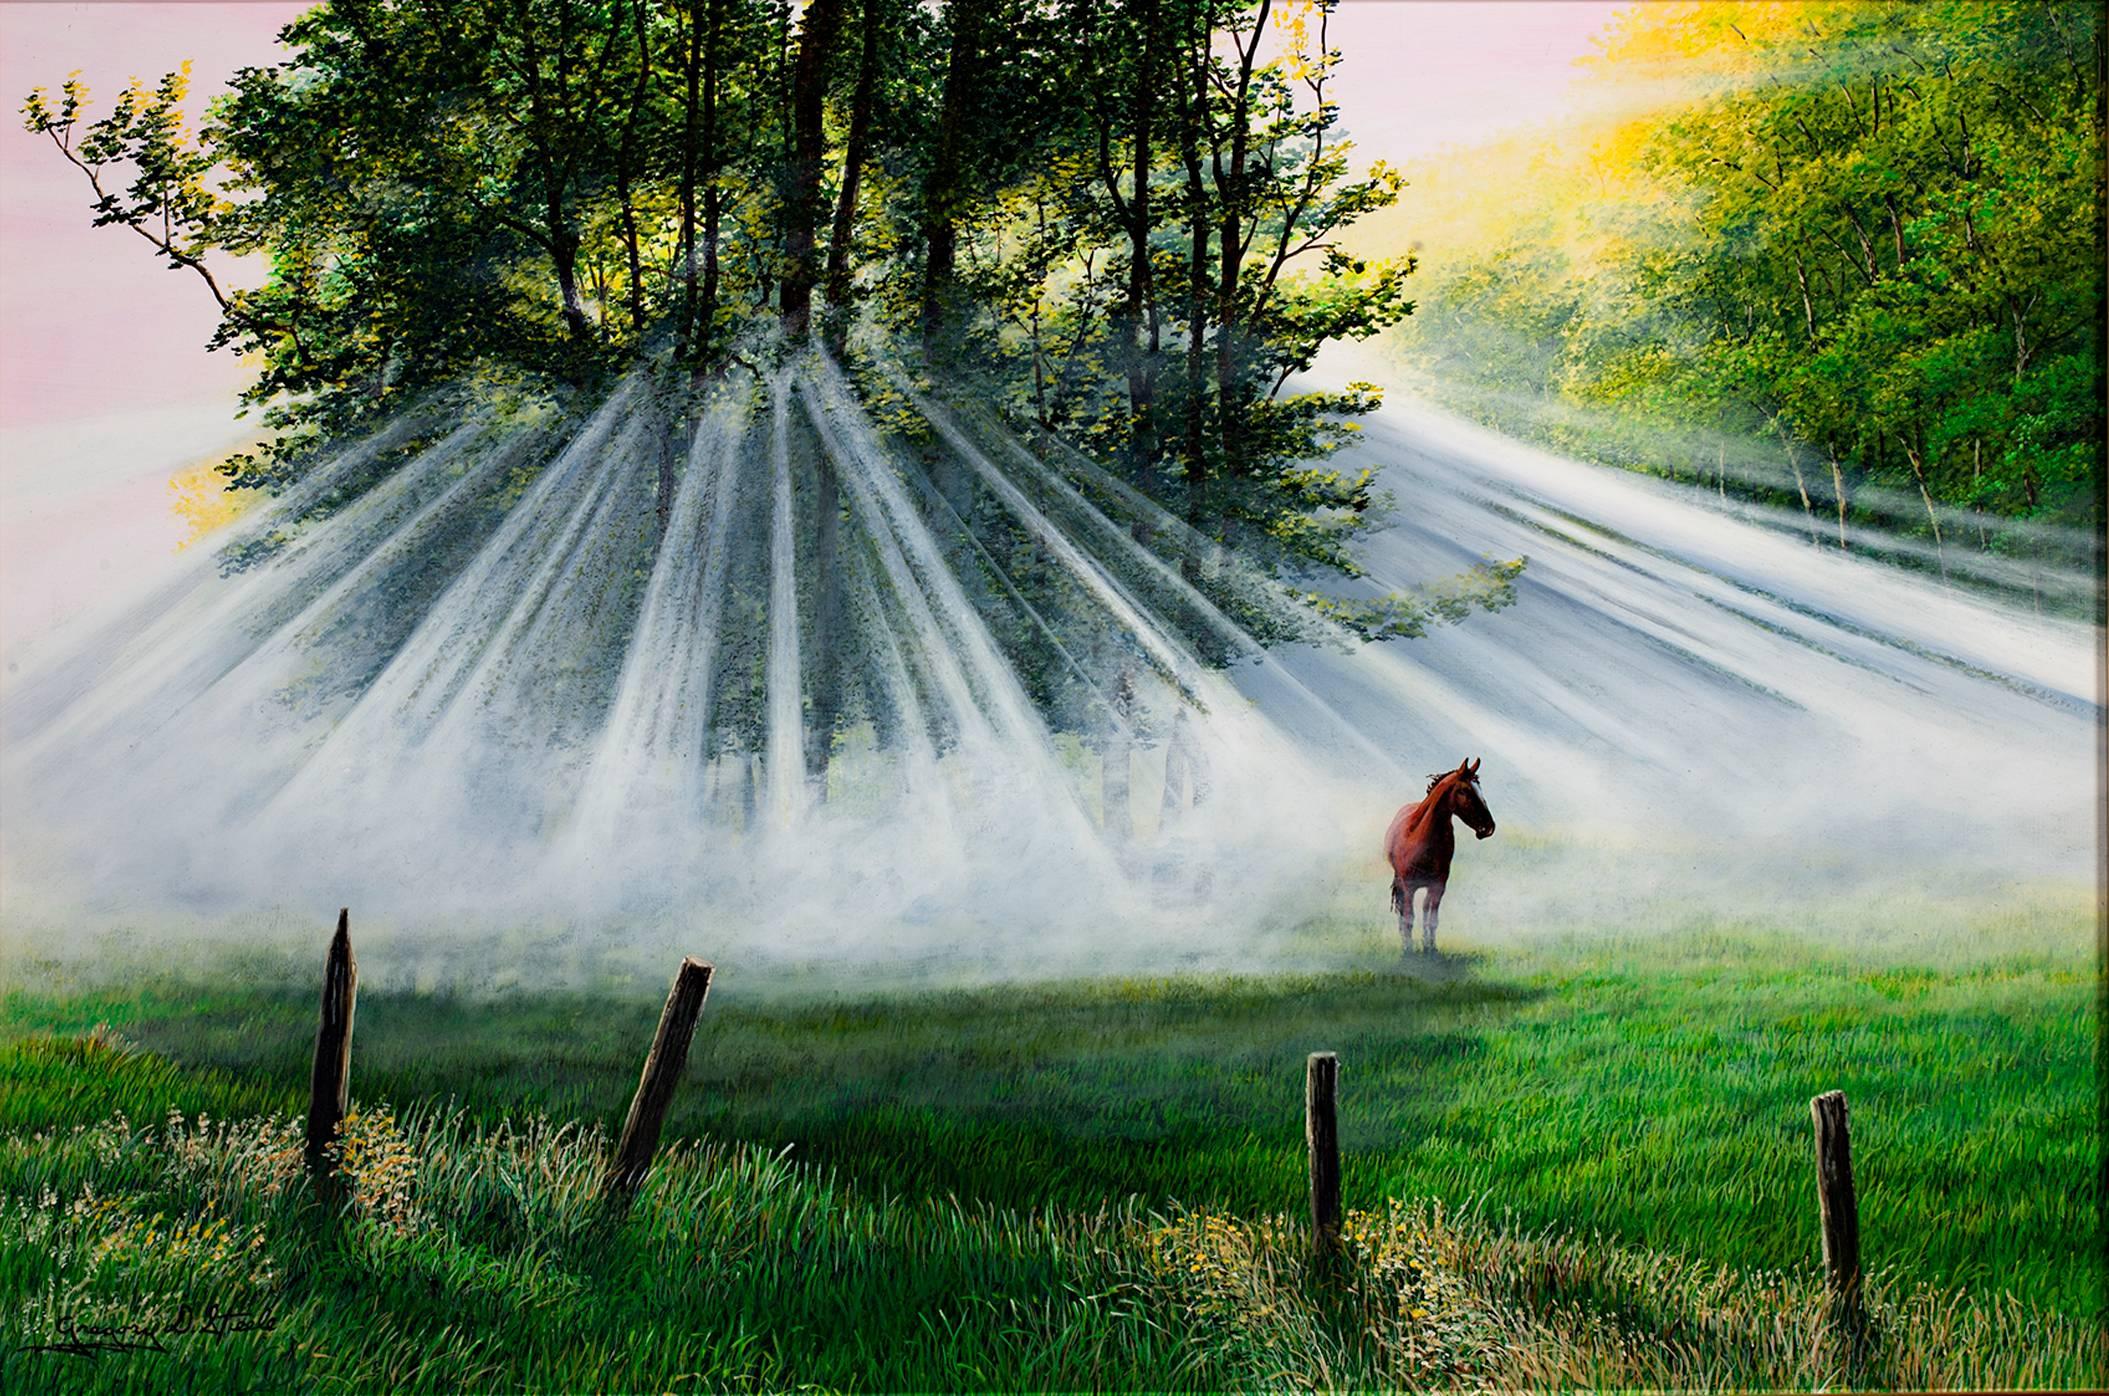 "Morning Fog" is an original oil painting on canvas by Gregory Steele. The artist signed the painting in the lower right. This piece depicts a horse in a fog-filled pasture as the sun begins to stream through the leaves. The artist uses a highly